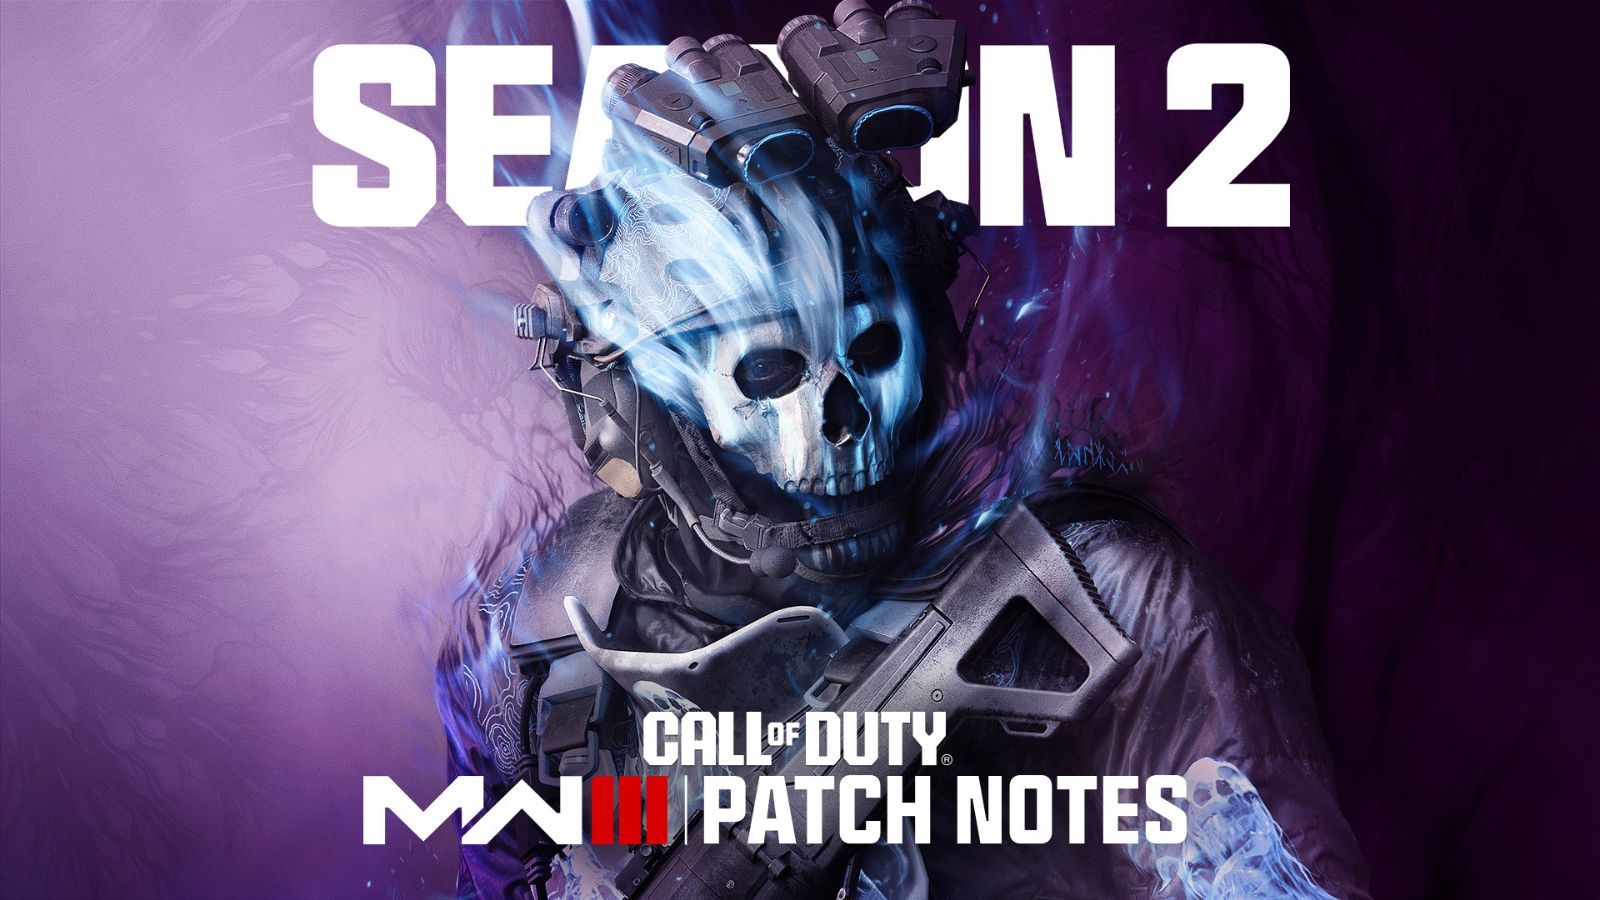 Modern Warfare 3 Season 2 Patch Notes: New Maps and Weapons Unveiled!